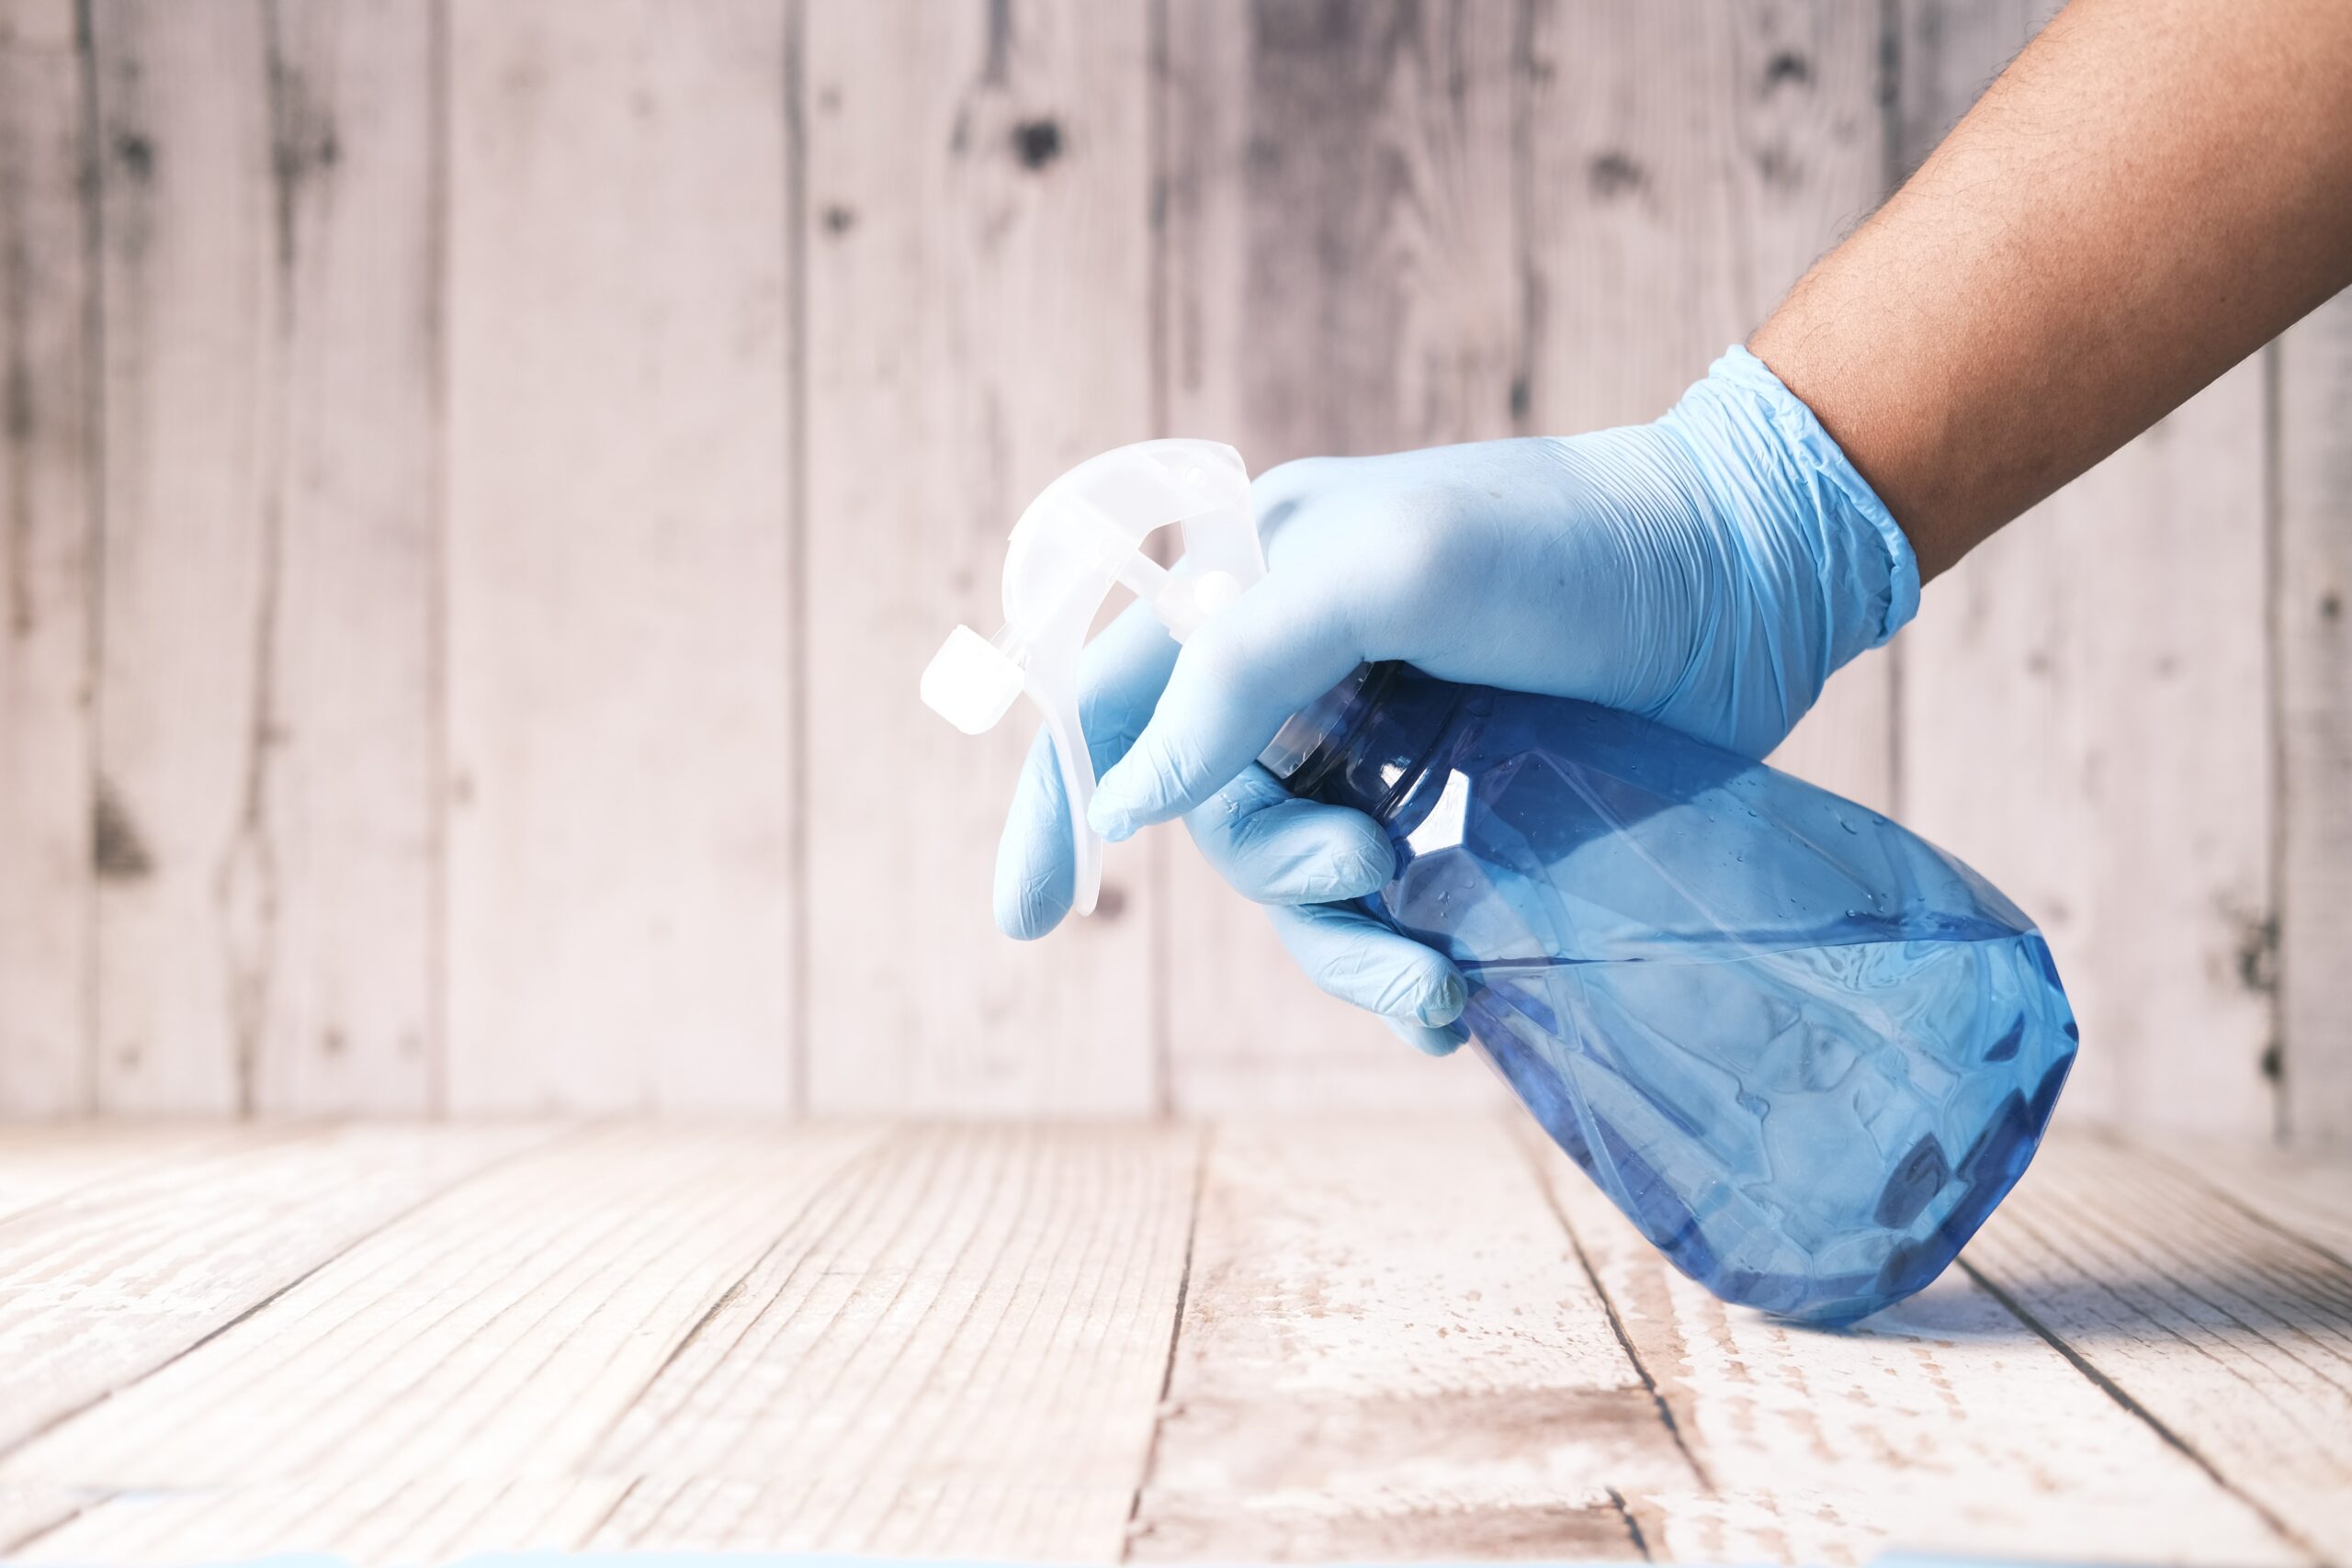 If you have mold inside your home, a mold remediation technician can come in and treat it at the source.